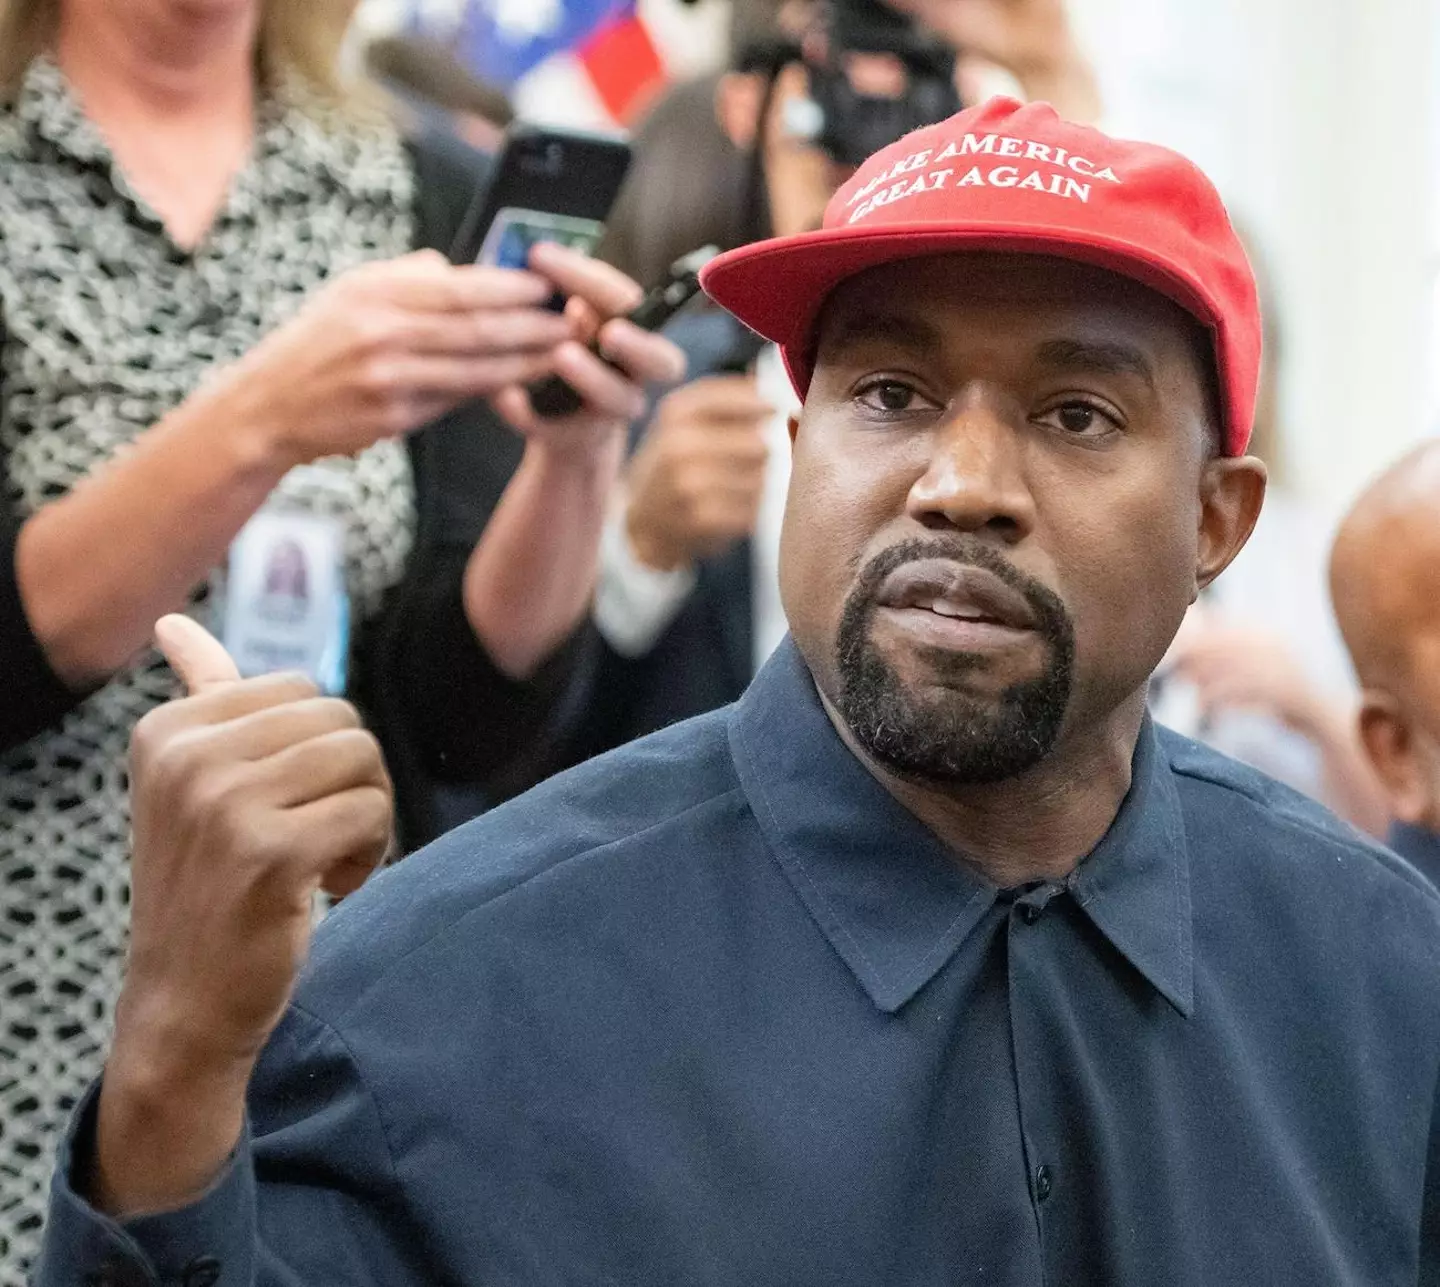 Unfounded rumours have erupted that Kanye West has been missing for weeks as his former business looks to sue the musician.